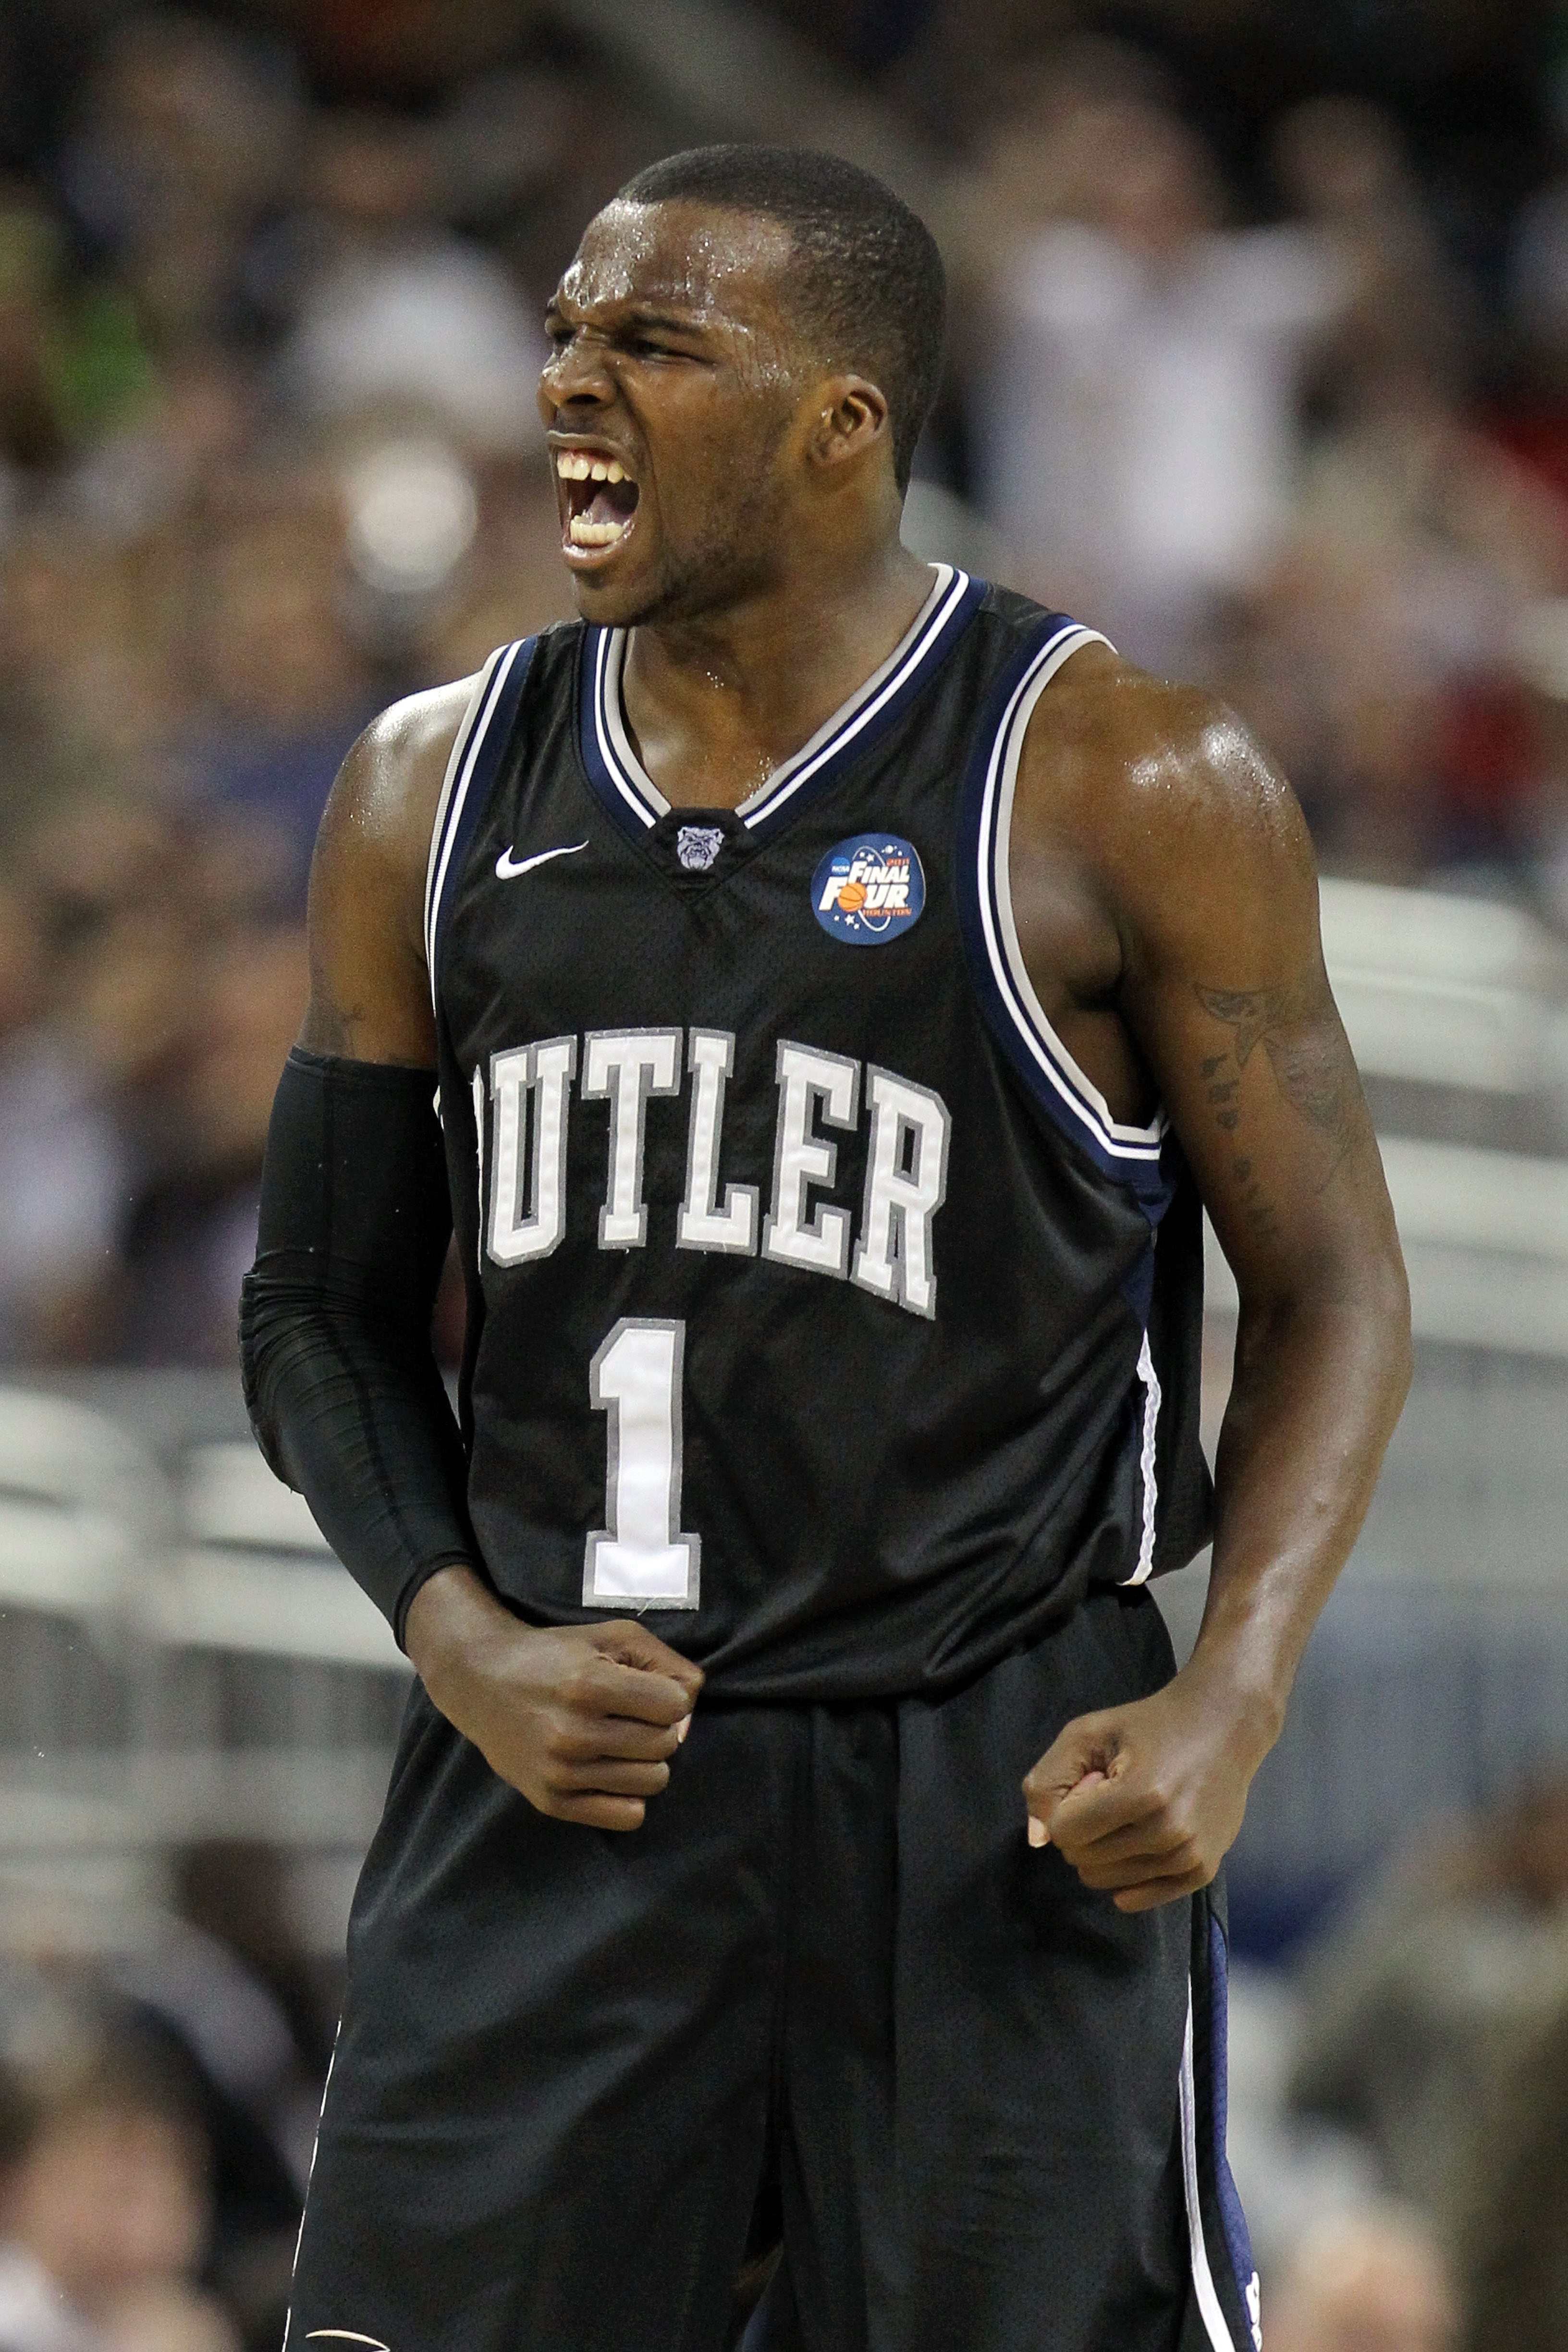 HOUSTON, TX - APRIL 04:  Shelvin Mack #1 of the Butler Bulldogs celebrate after a shot to end the first half against the Connecticut Huskies during the National Championship Game of the 2011 NCAA Division I Men's Basketball Tournament at Reliant Stadium o